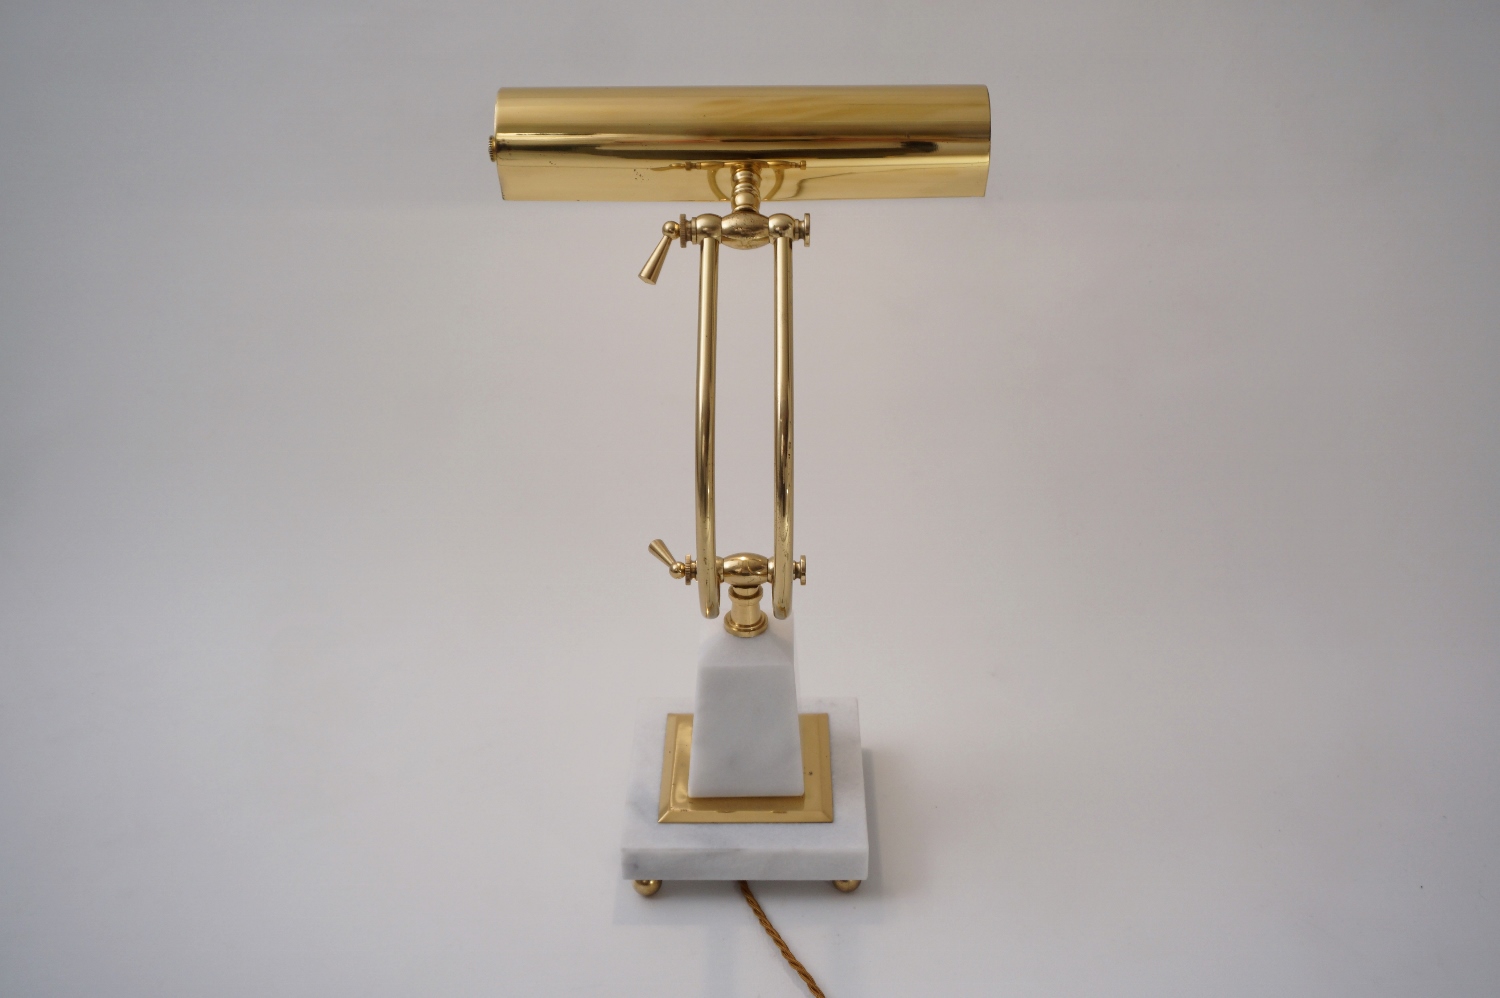 Splendor Living Wallace Adjustable Table Lamp in Antique Brass